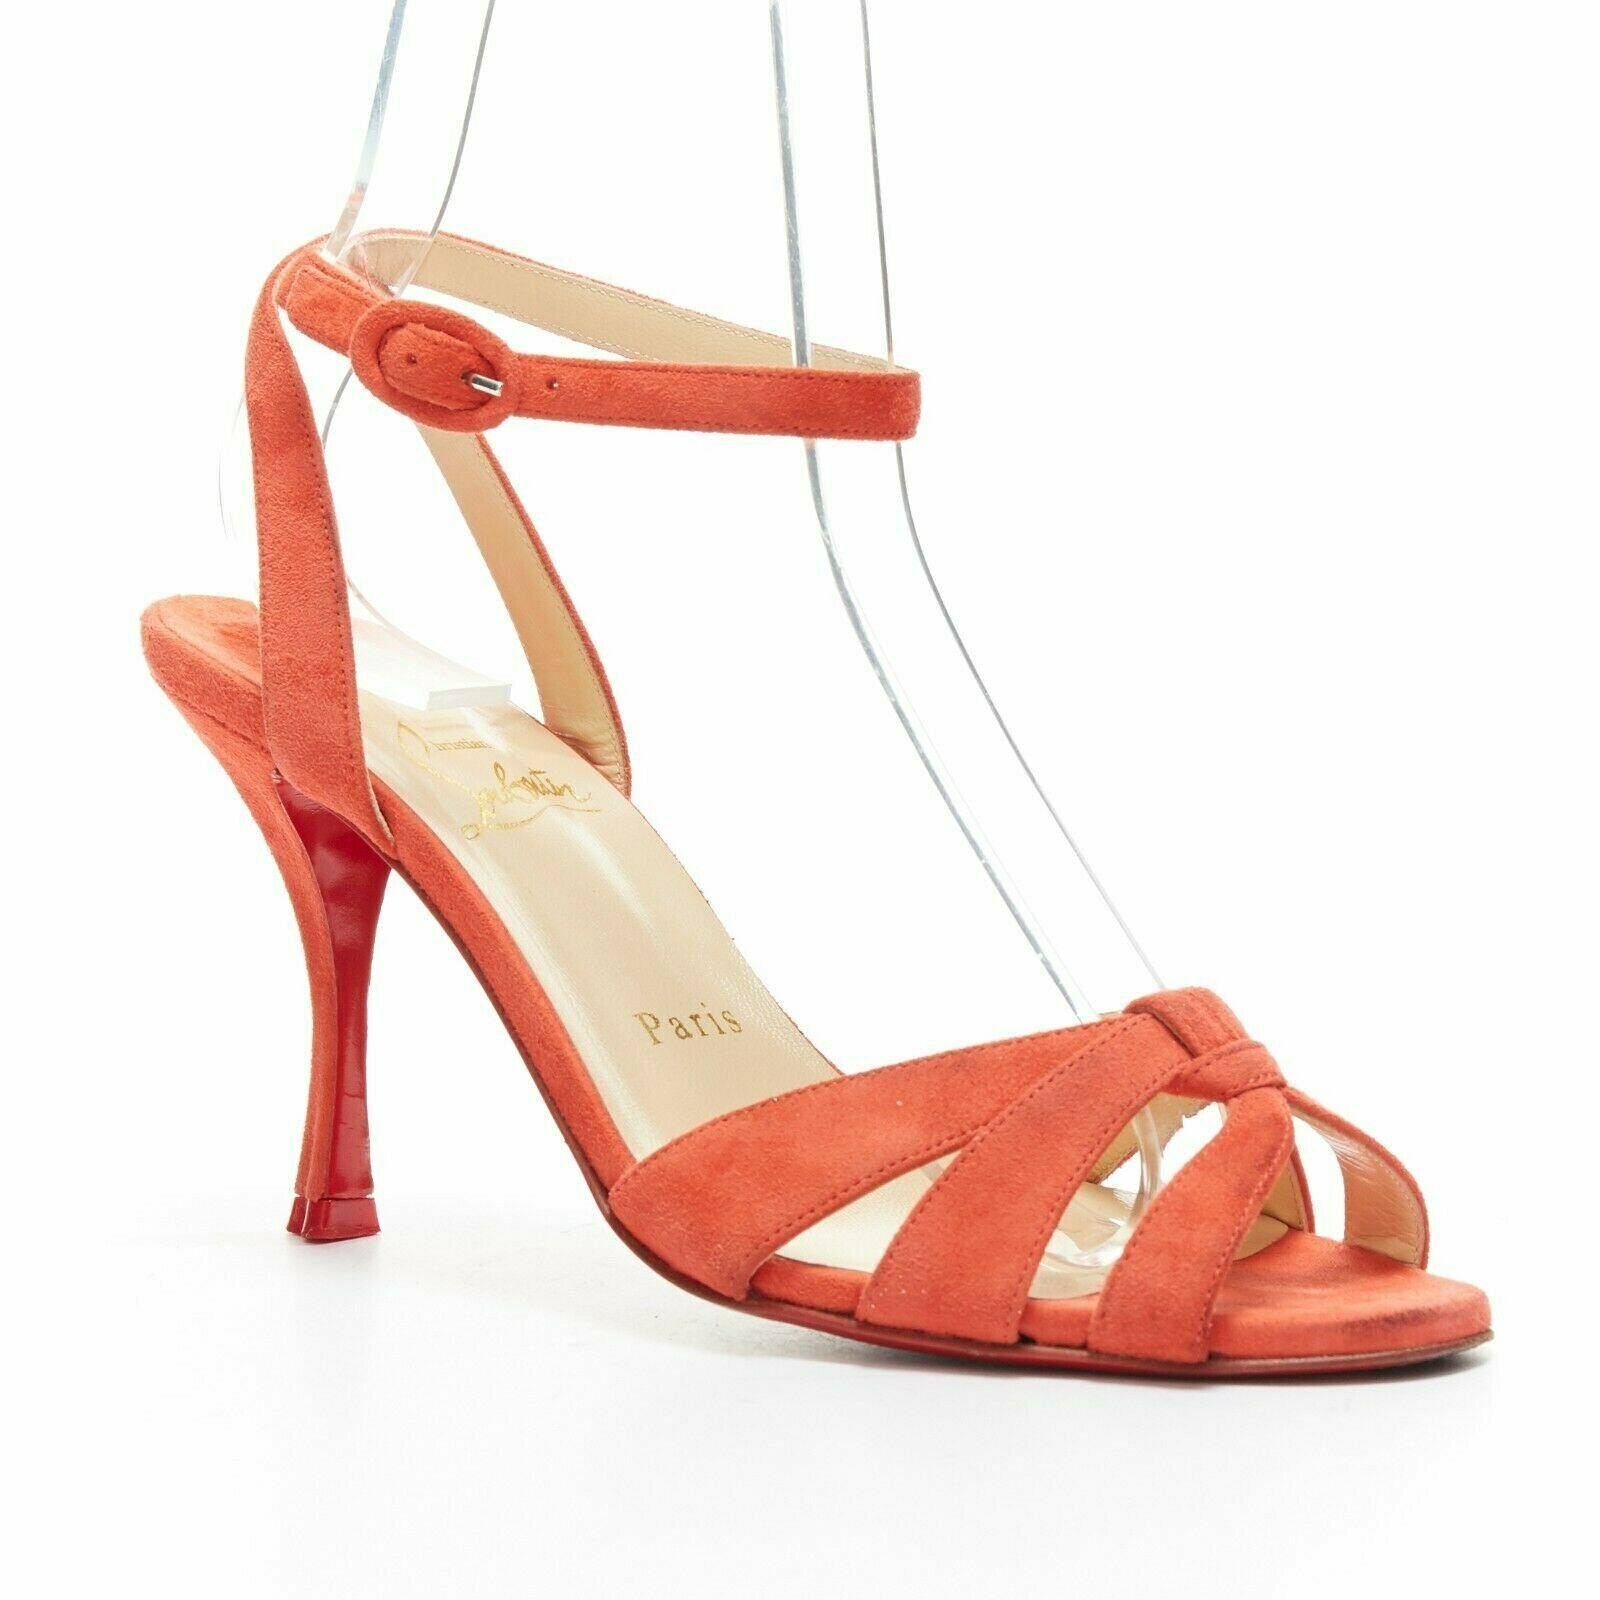 CHRISTIAN LOUBOUTIN red suede strappy ankle strap curved mid heel sandals EU37 
Reference: TGAS/A03348 
Brand: Christian Louboutin 
Designer: Christian Louboutin 
Model: Strappy suede heel 
Material: Suede 
Color: Red 
Pattern: Solid 
Closure: Ankle